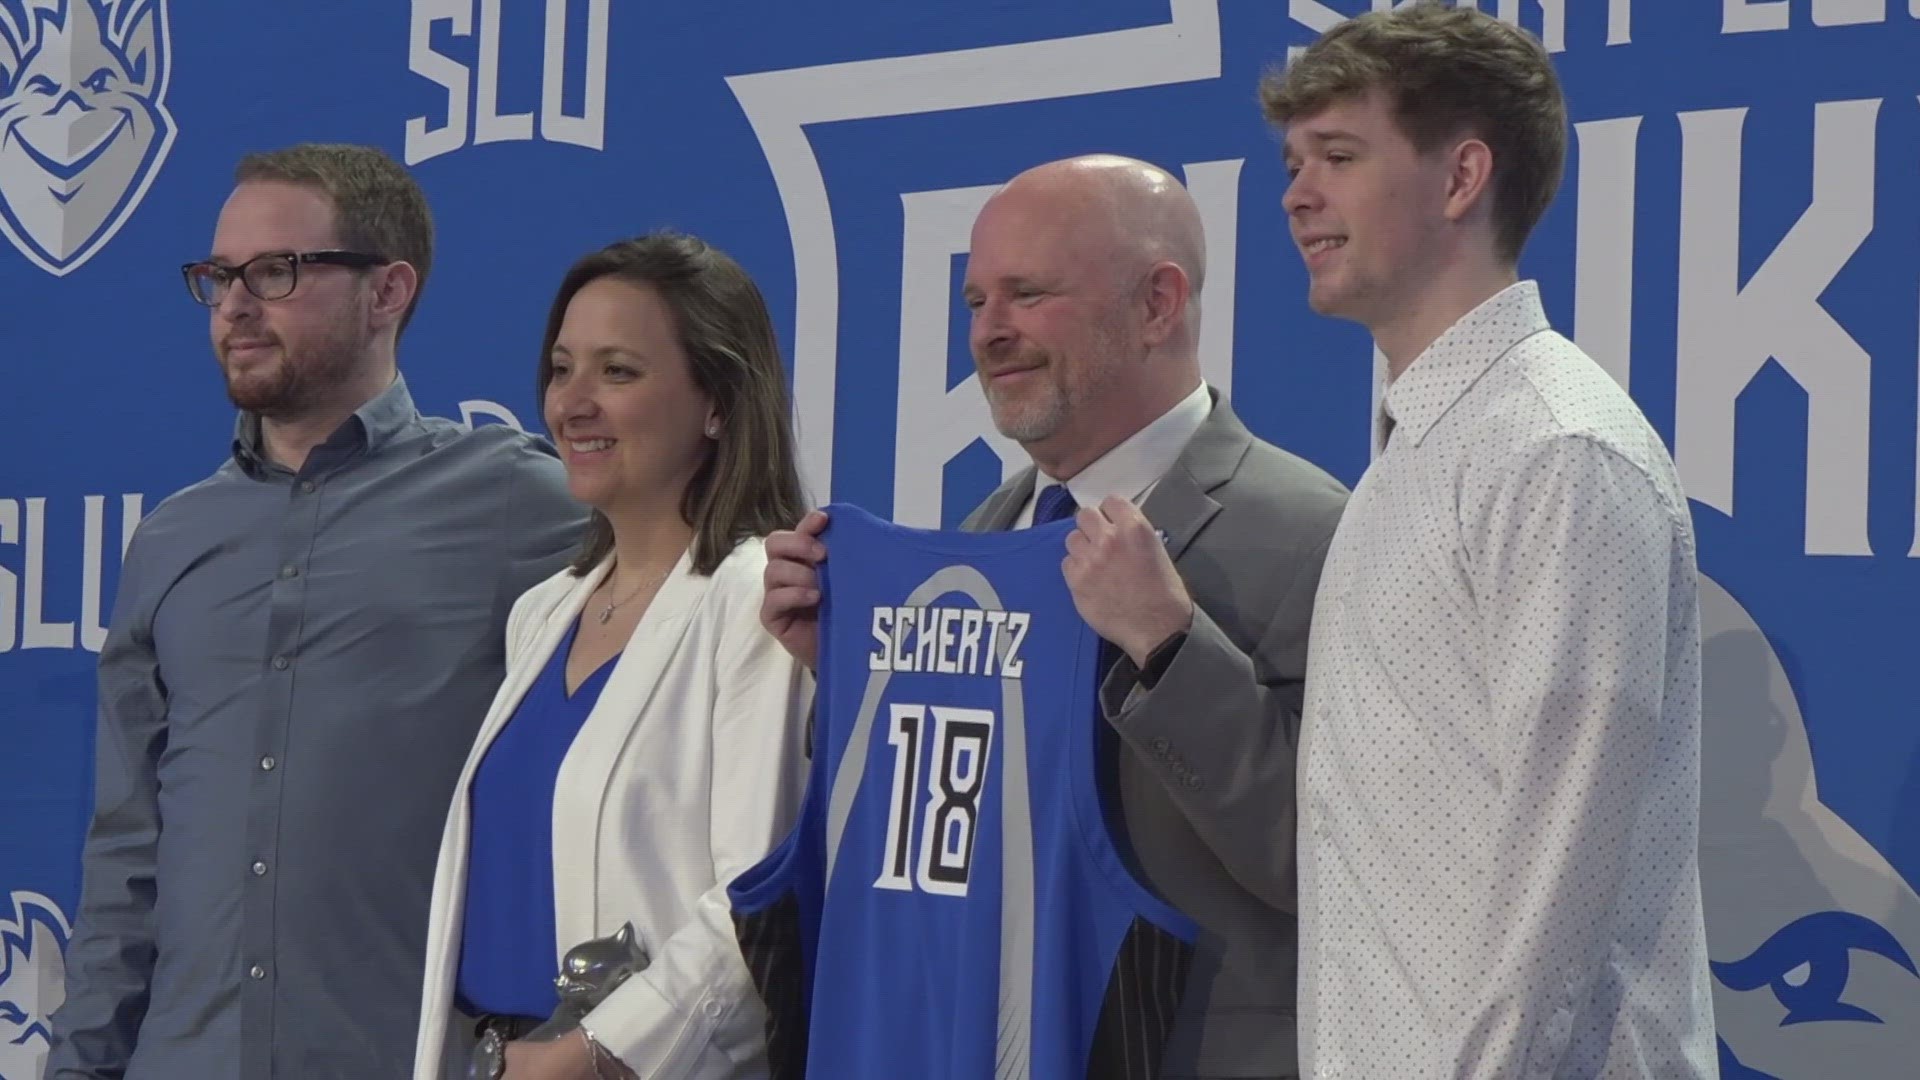 When he was officially introduced Monday at SLU, Josh Schertz discussed how he was inspired by former coach Rick Majerus.